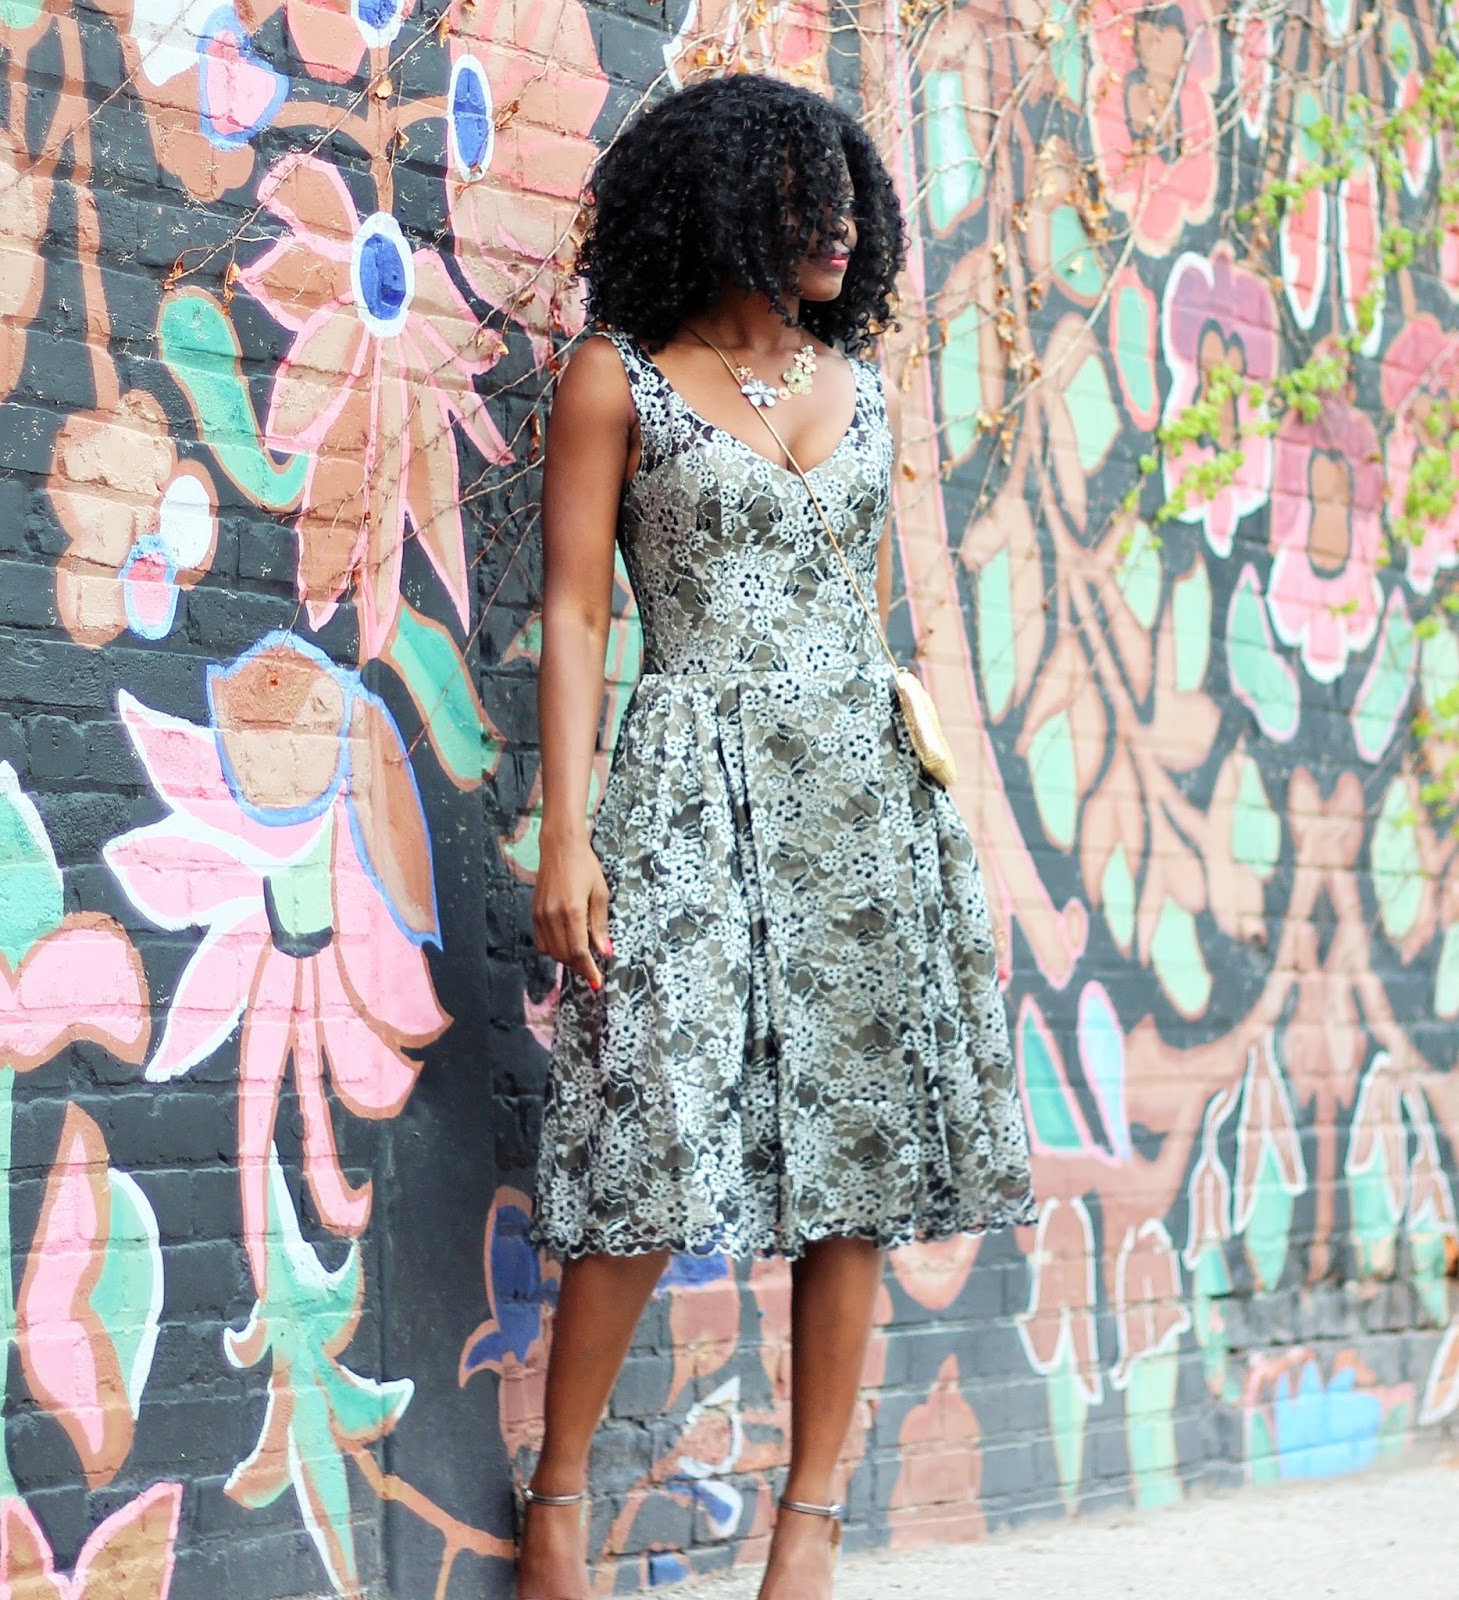 SUMMER WEDDING GUEST OUTFIT: BLACK AND LACE CLAUDETTE SWING DRESS